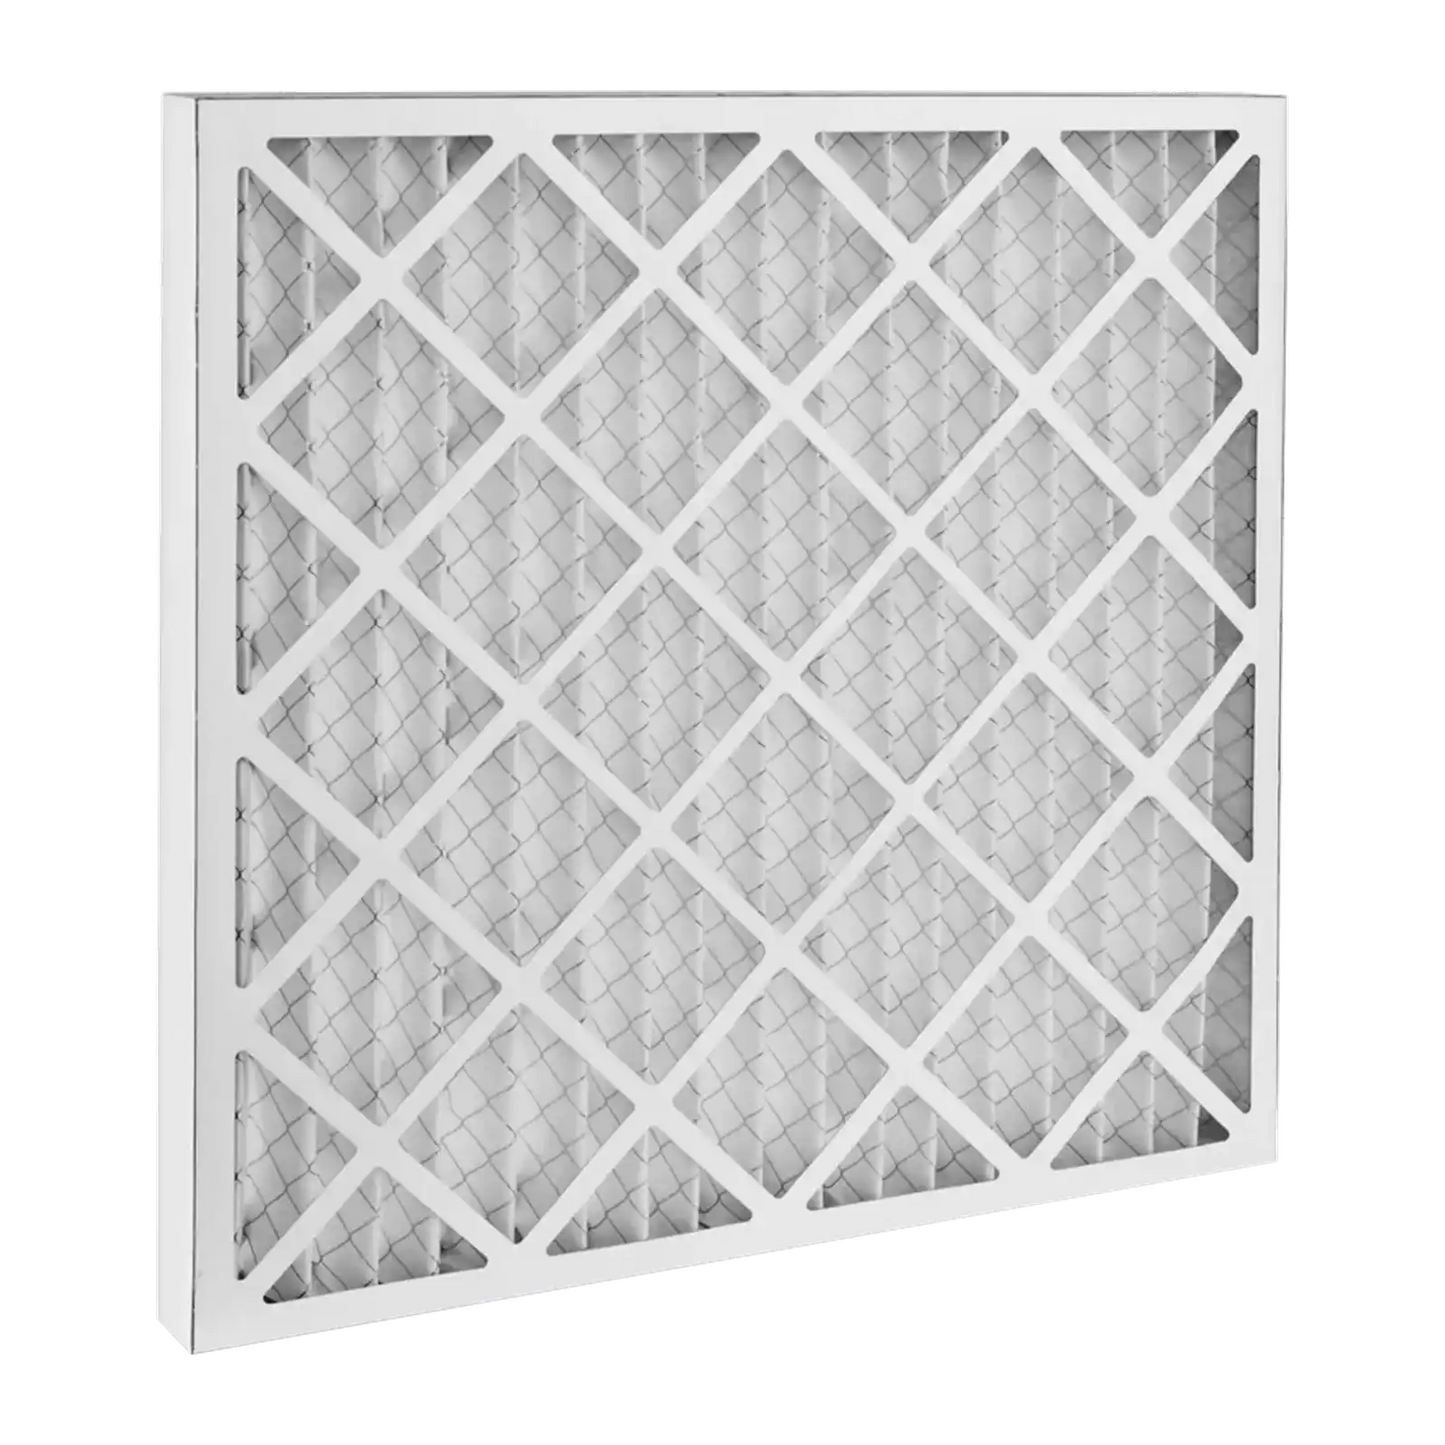 Dafco 14x25x1 Furnace AC Filter - Case of 12